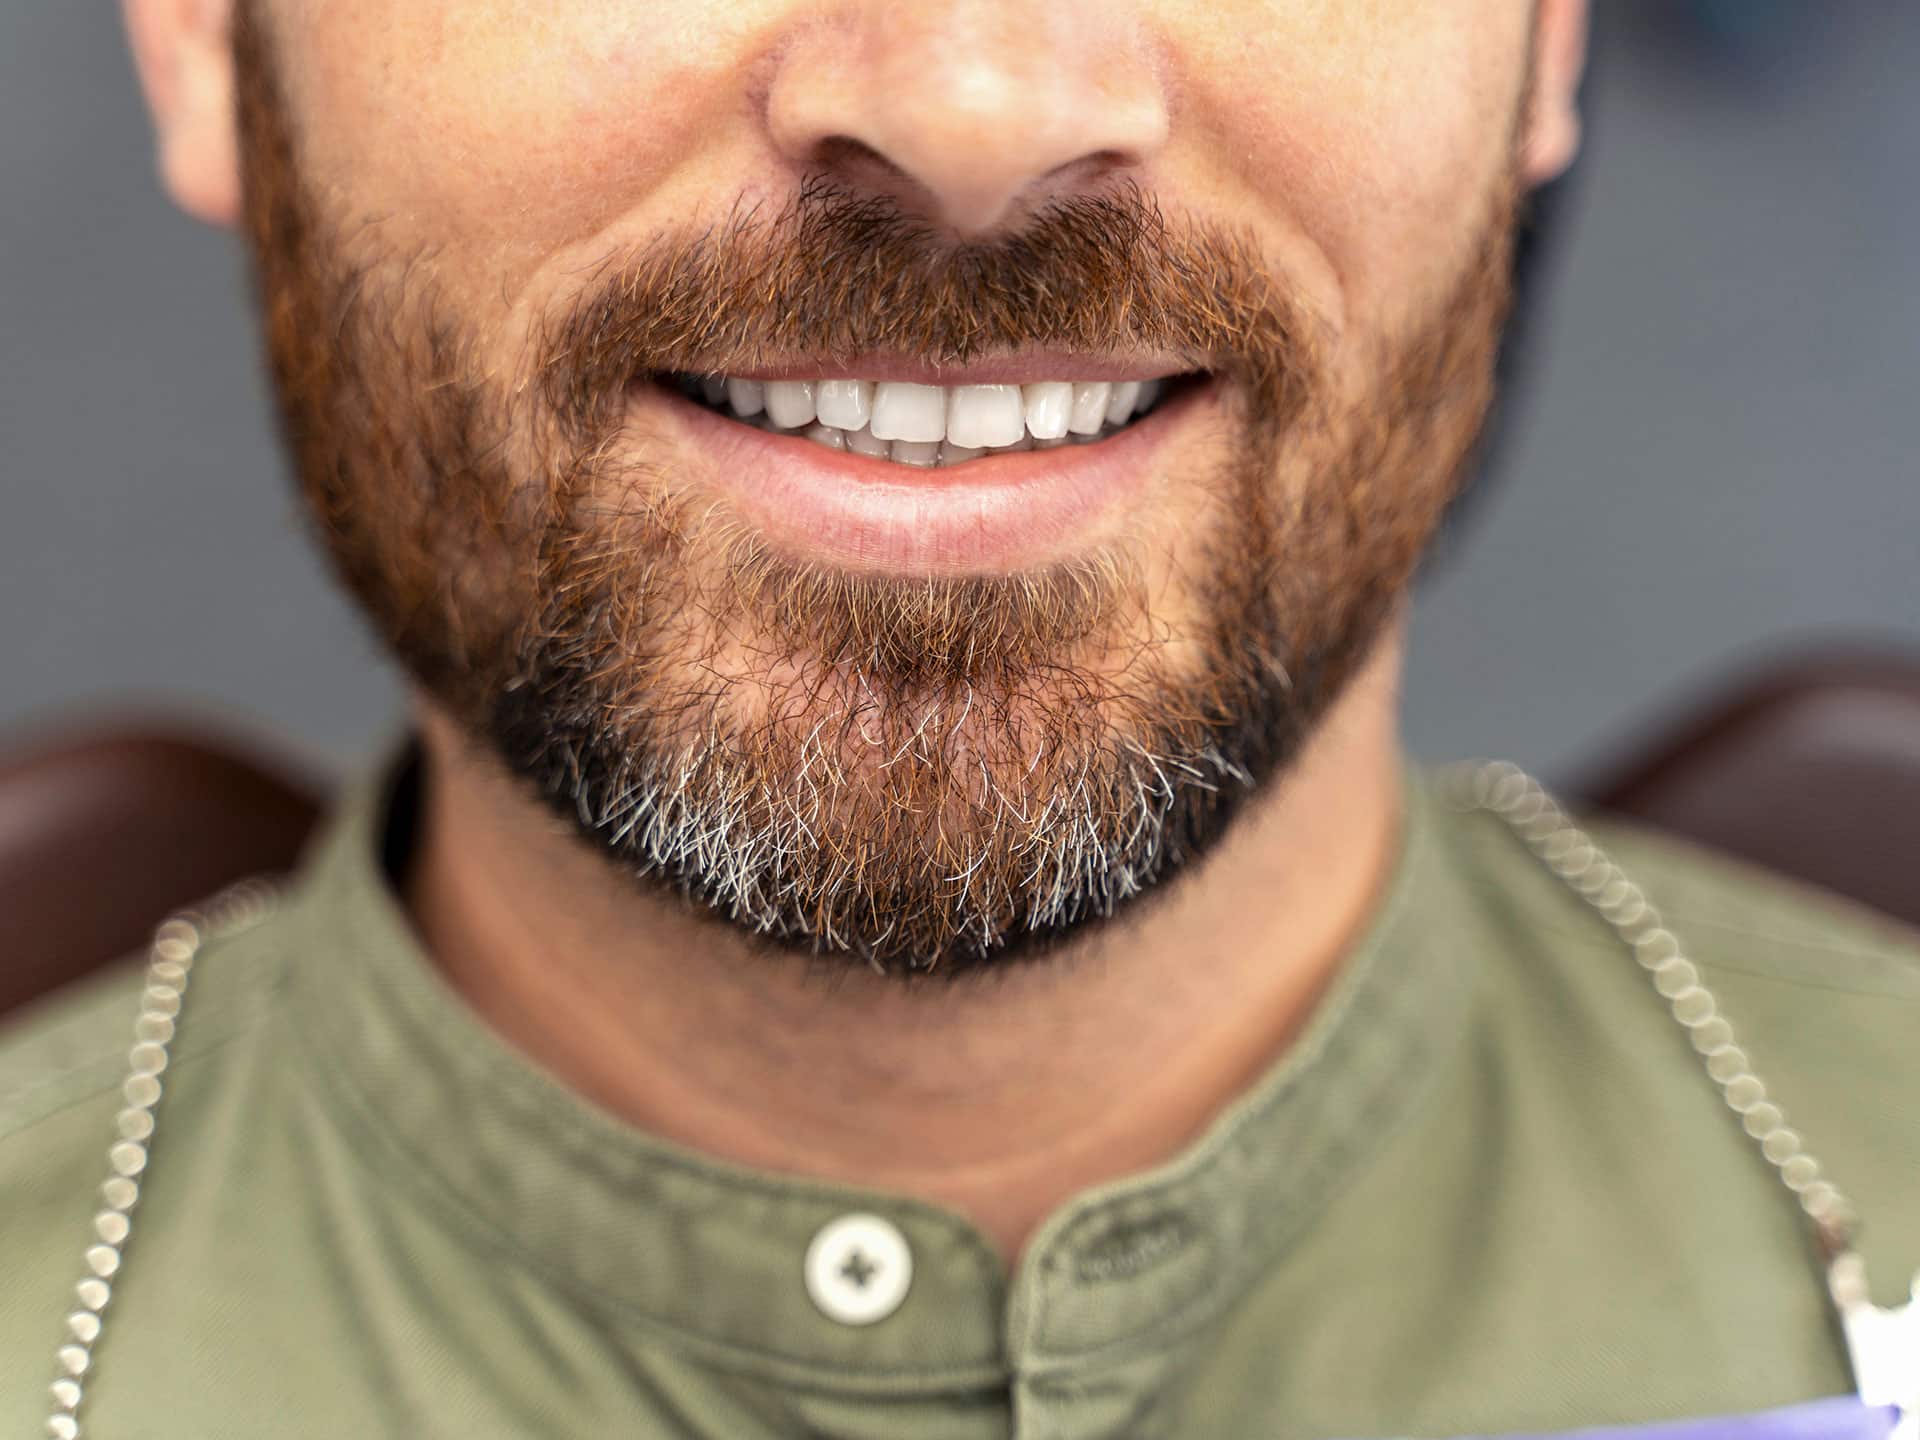 Close up of a bearded man's teeth up at timber ridge dental center dental appointment